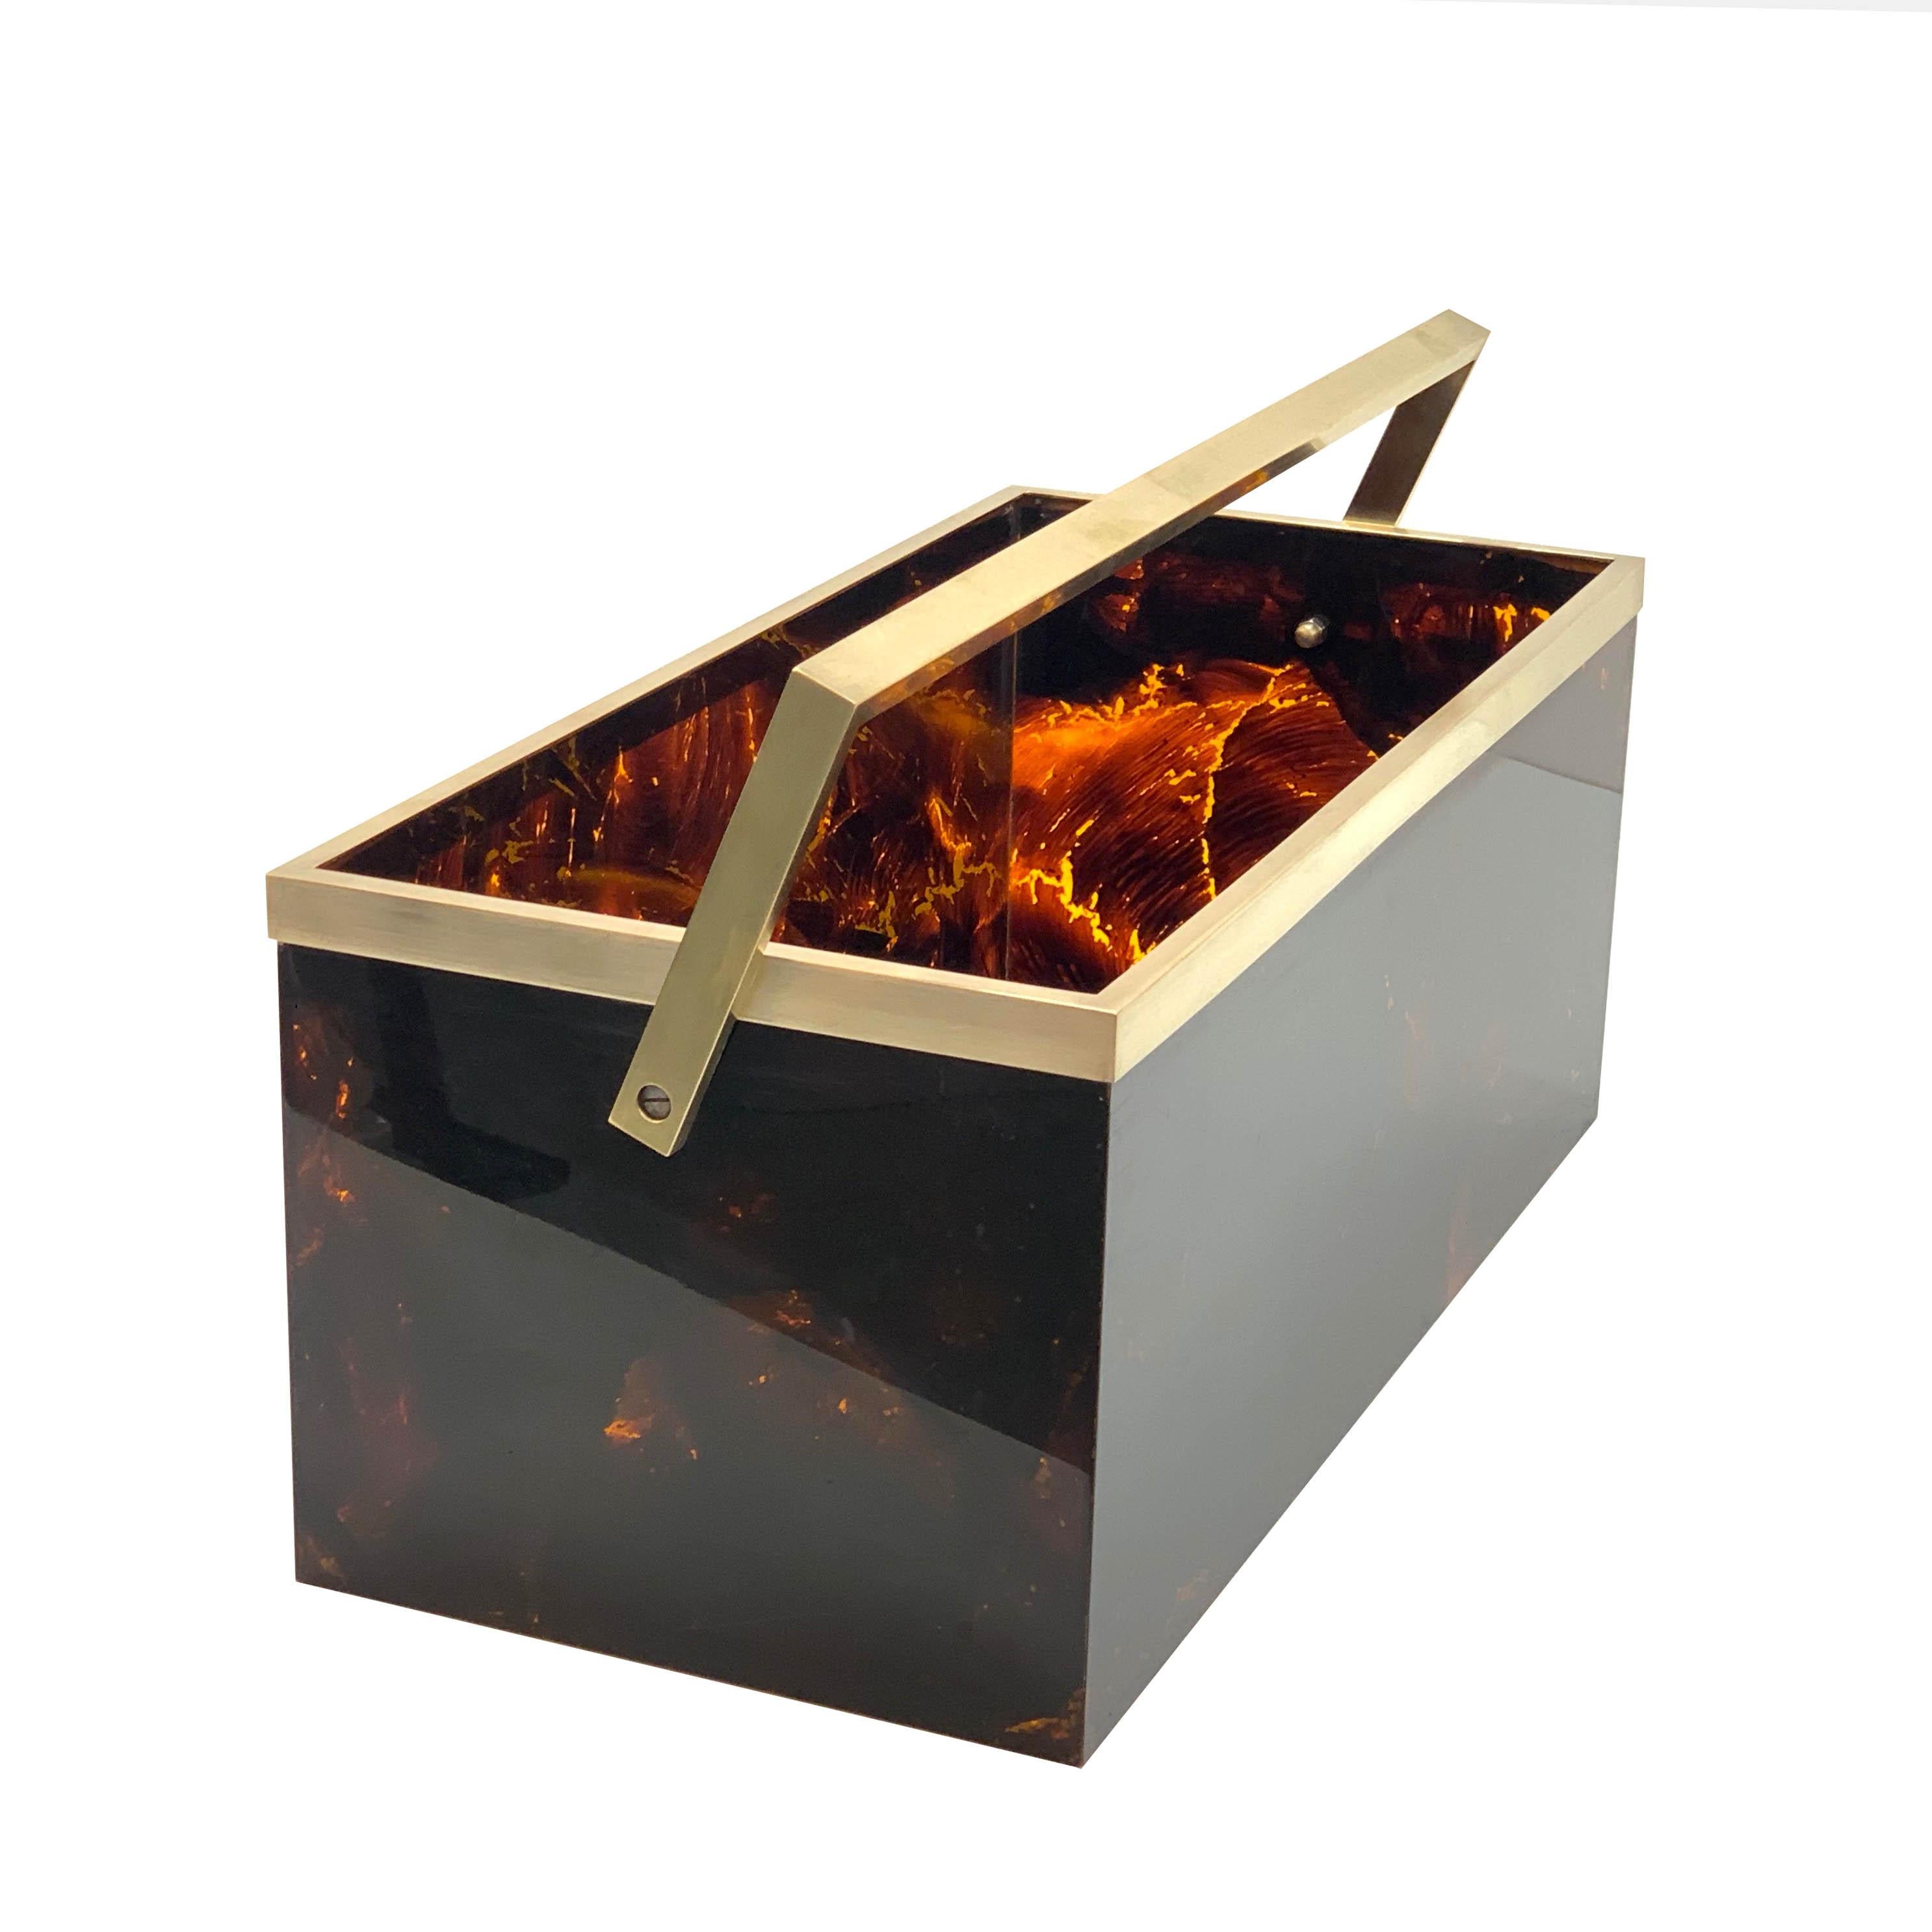 Midcentury magazine rack very rare tortoiseshell plexiglass with brass edges and handles. This fantastic piece is attributed to Willy Rizzo and was designed in Italy during the 1970s.

This item has a classic and popular look of the 1970s, used by